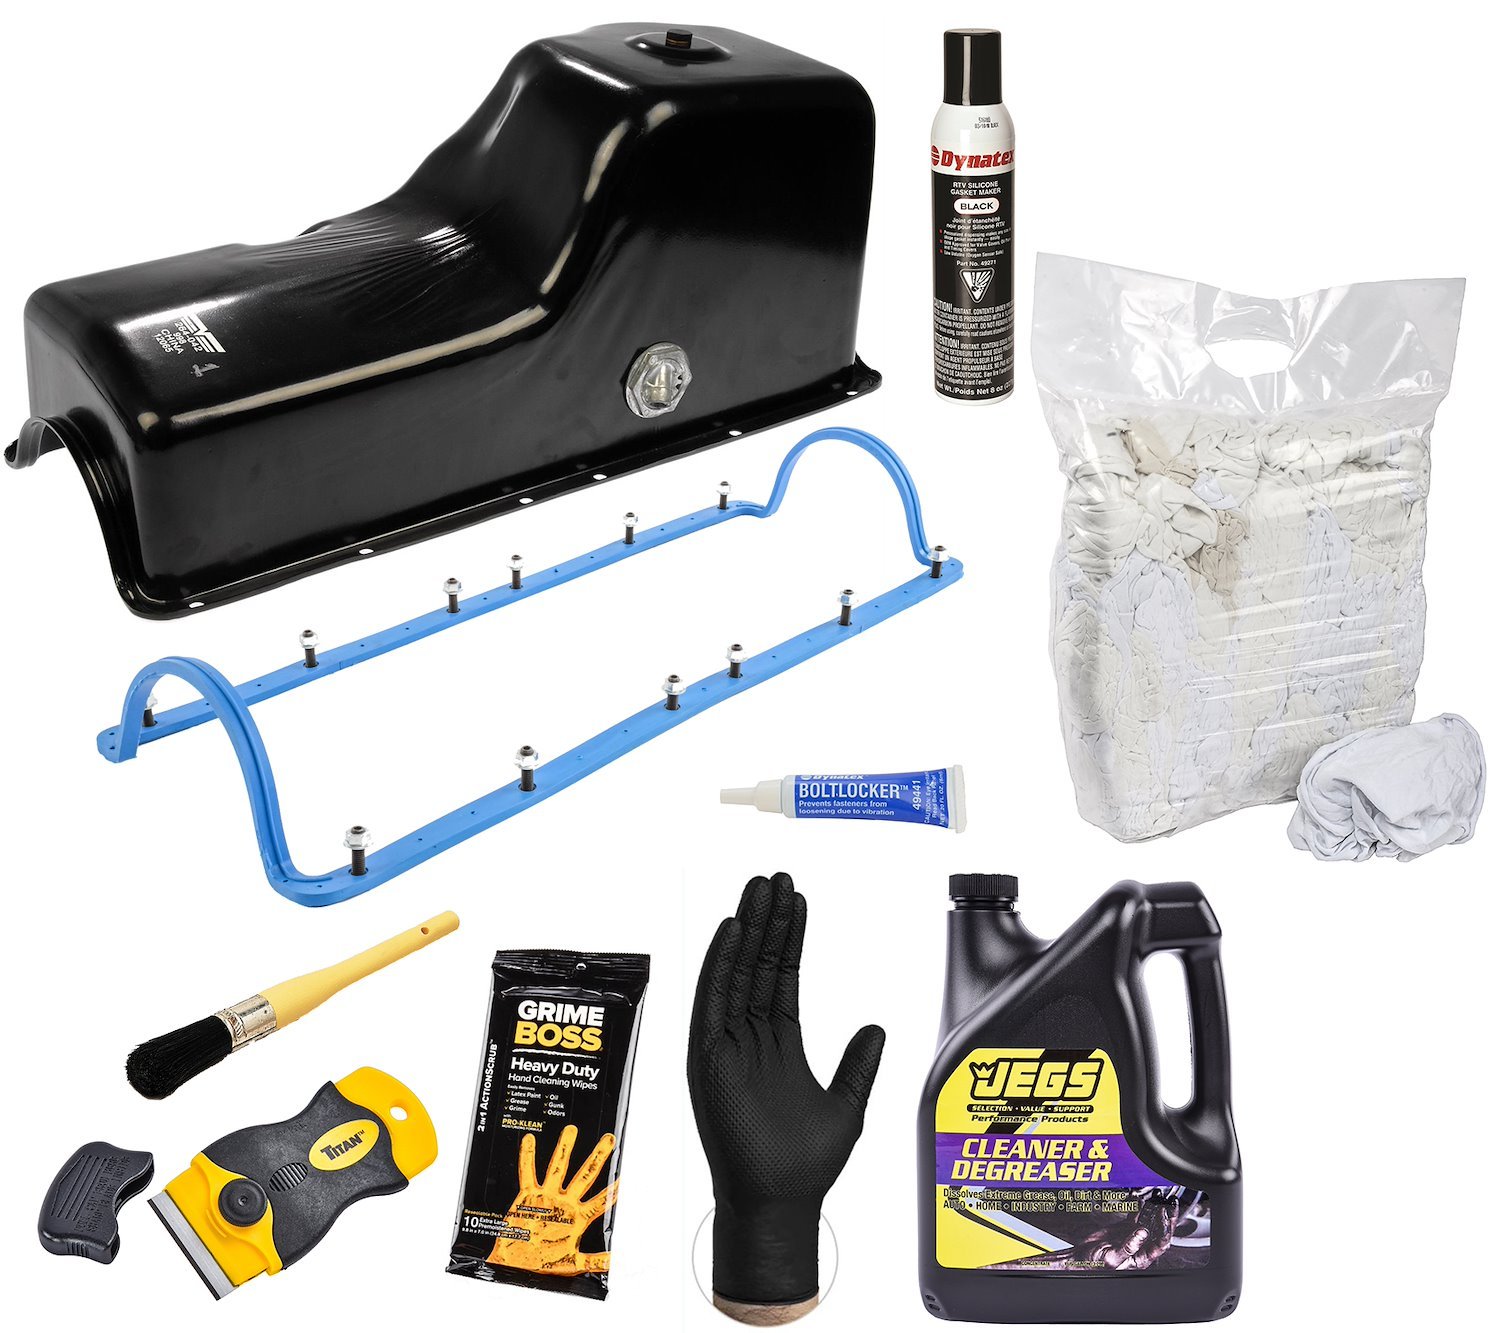 Stock Replacement Oil Pan Kit 1997-2003 Ford F-Series Super Duty Truck, Econoline, Excursion 7.3L Diesel